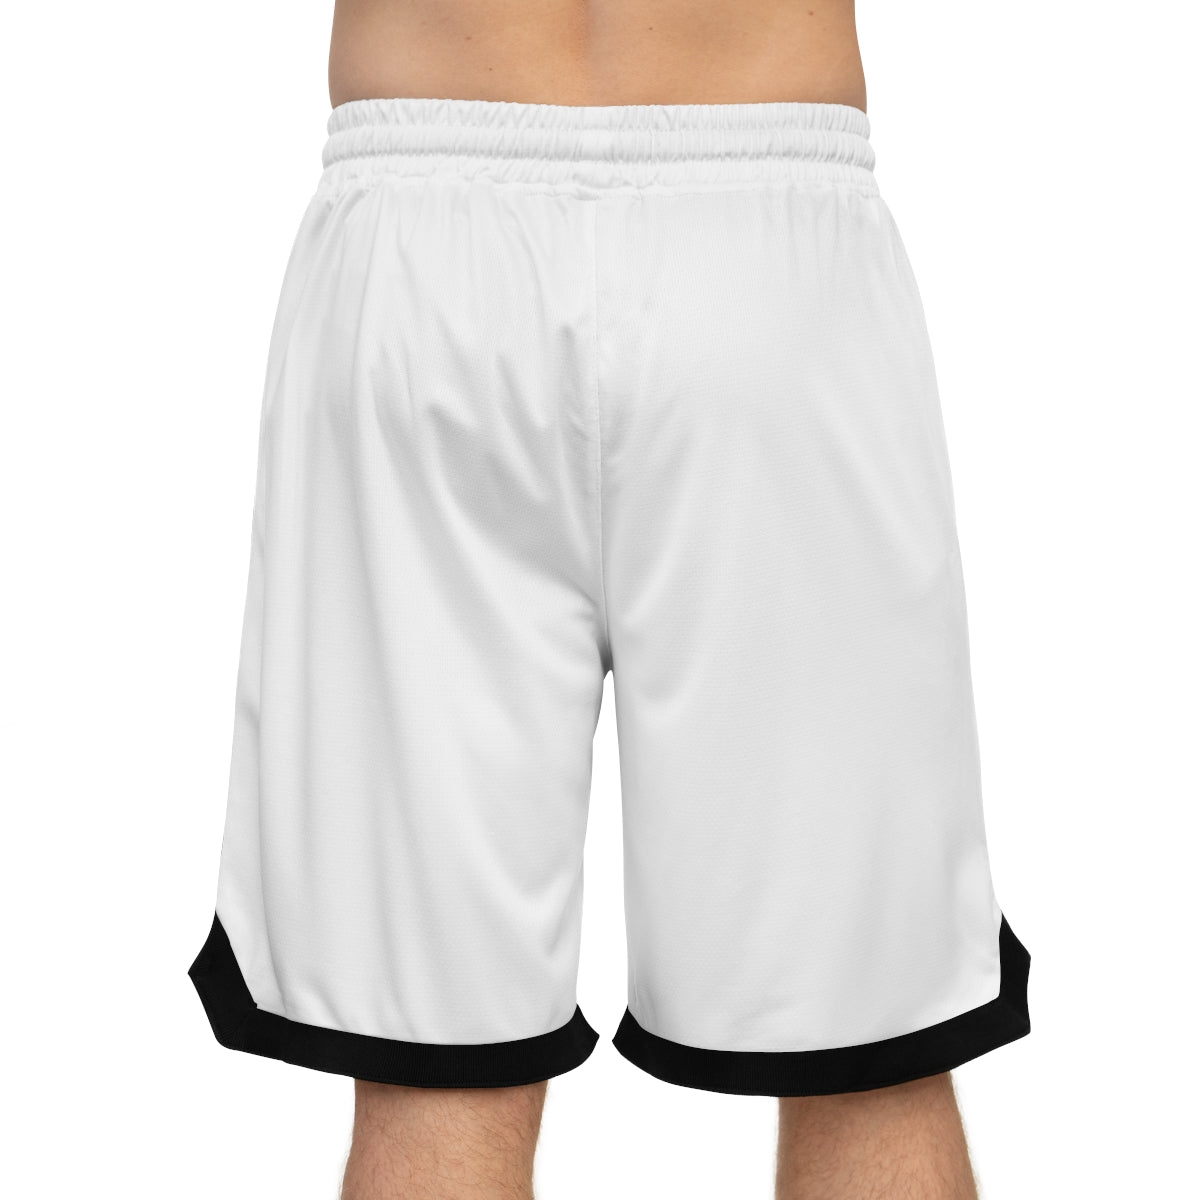 theDopeOnes Finals Shorts